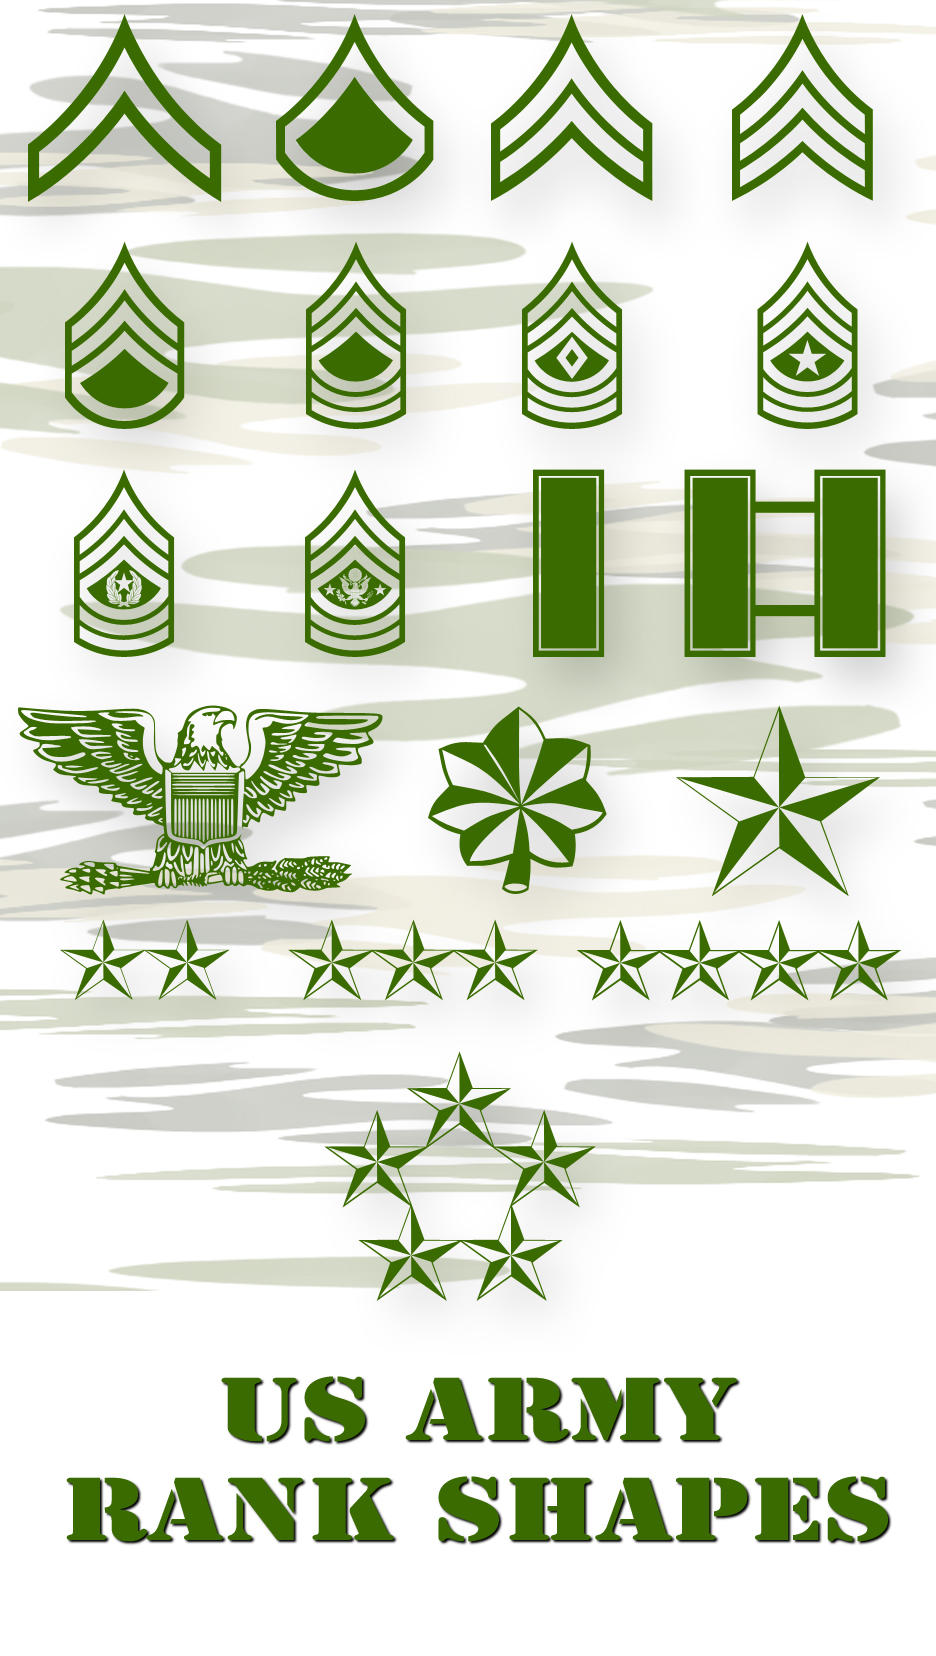 What are the ranks of the U.S. Army?